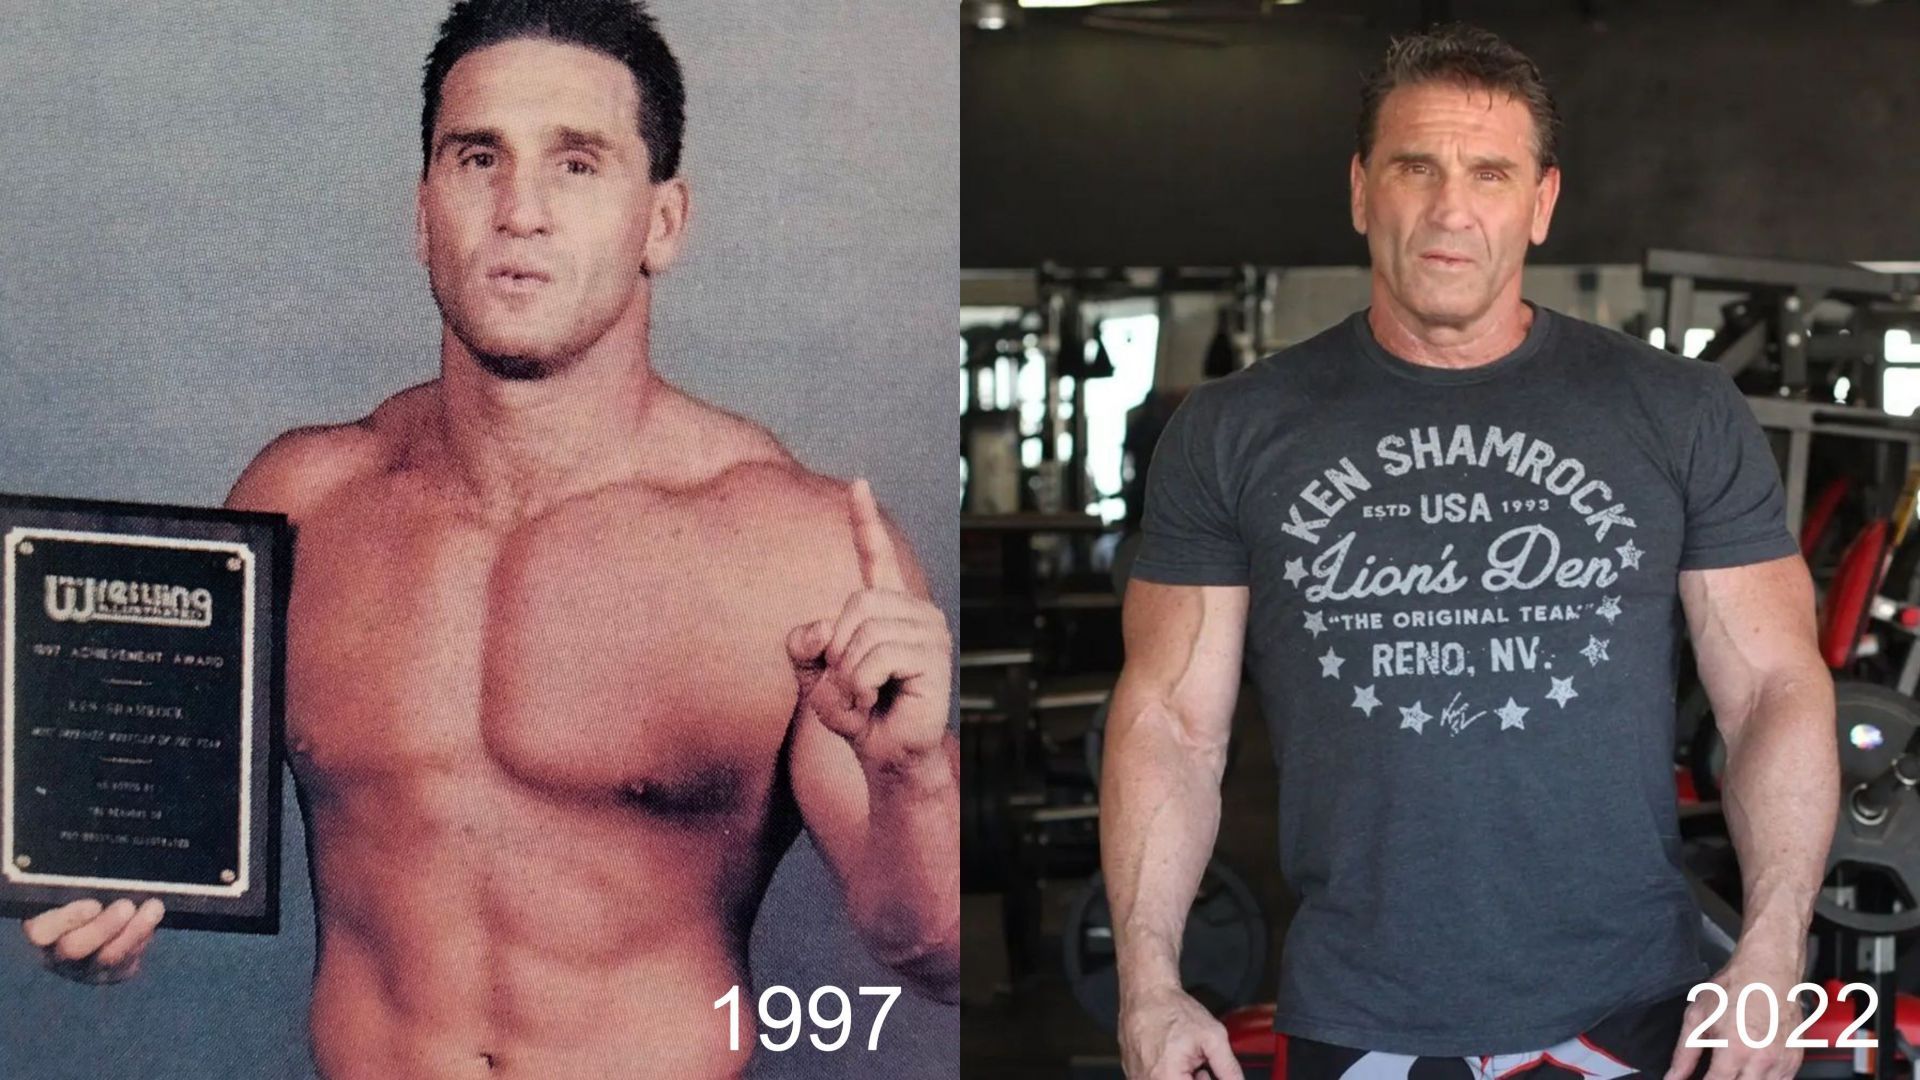 Ken Shamrock last competed nearly a year ago